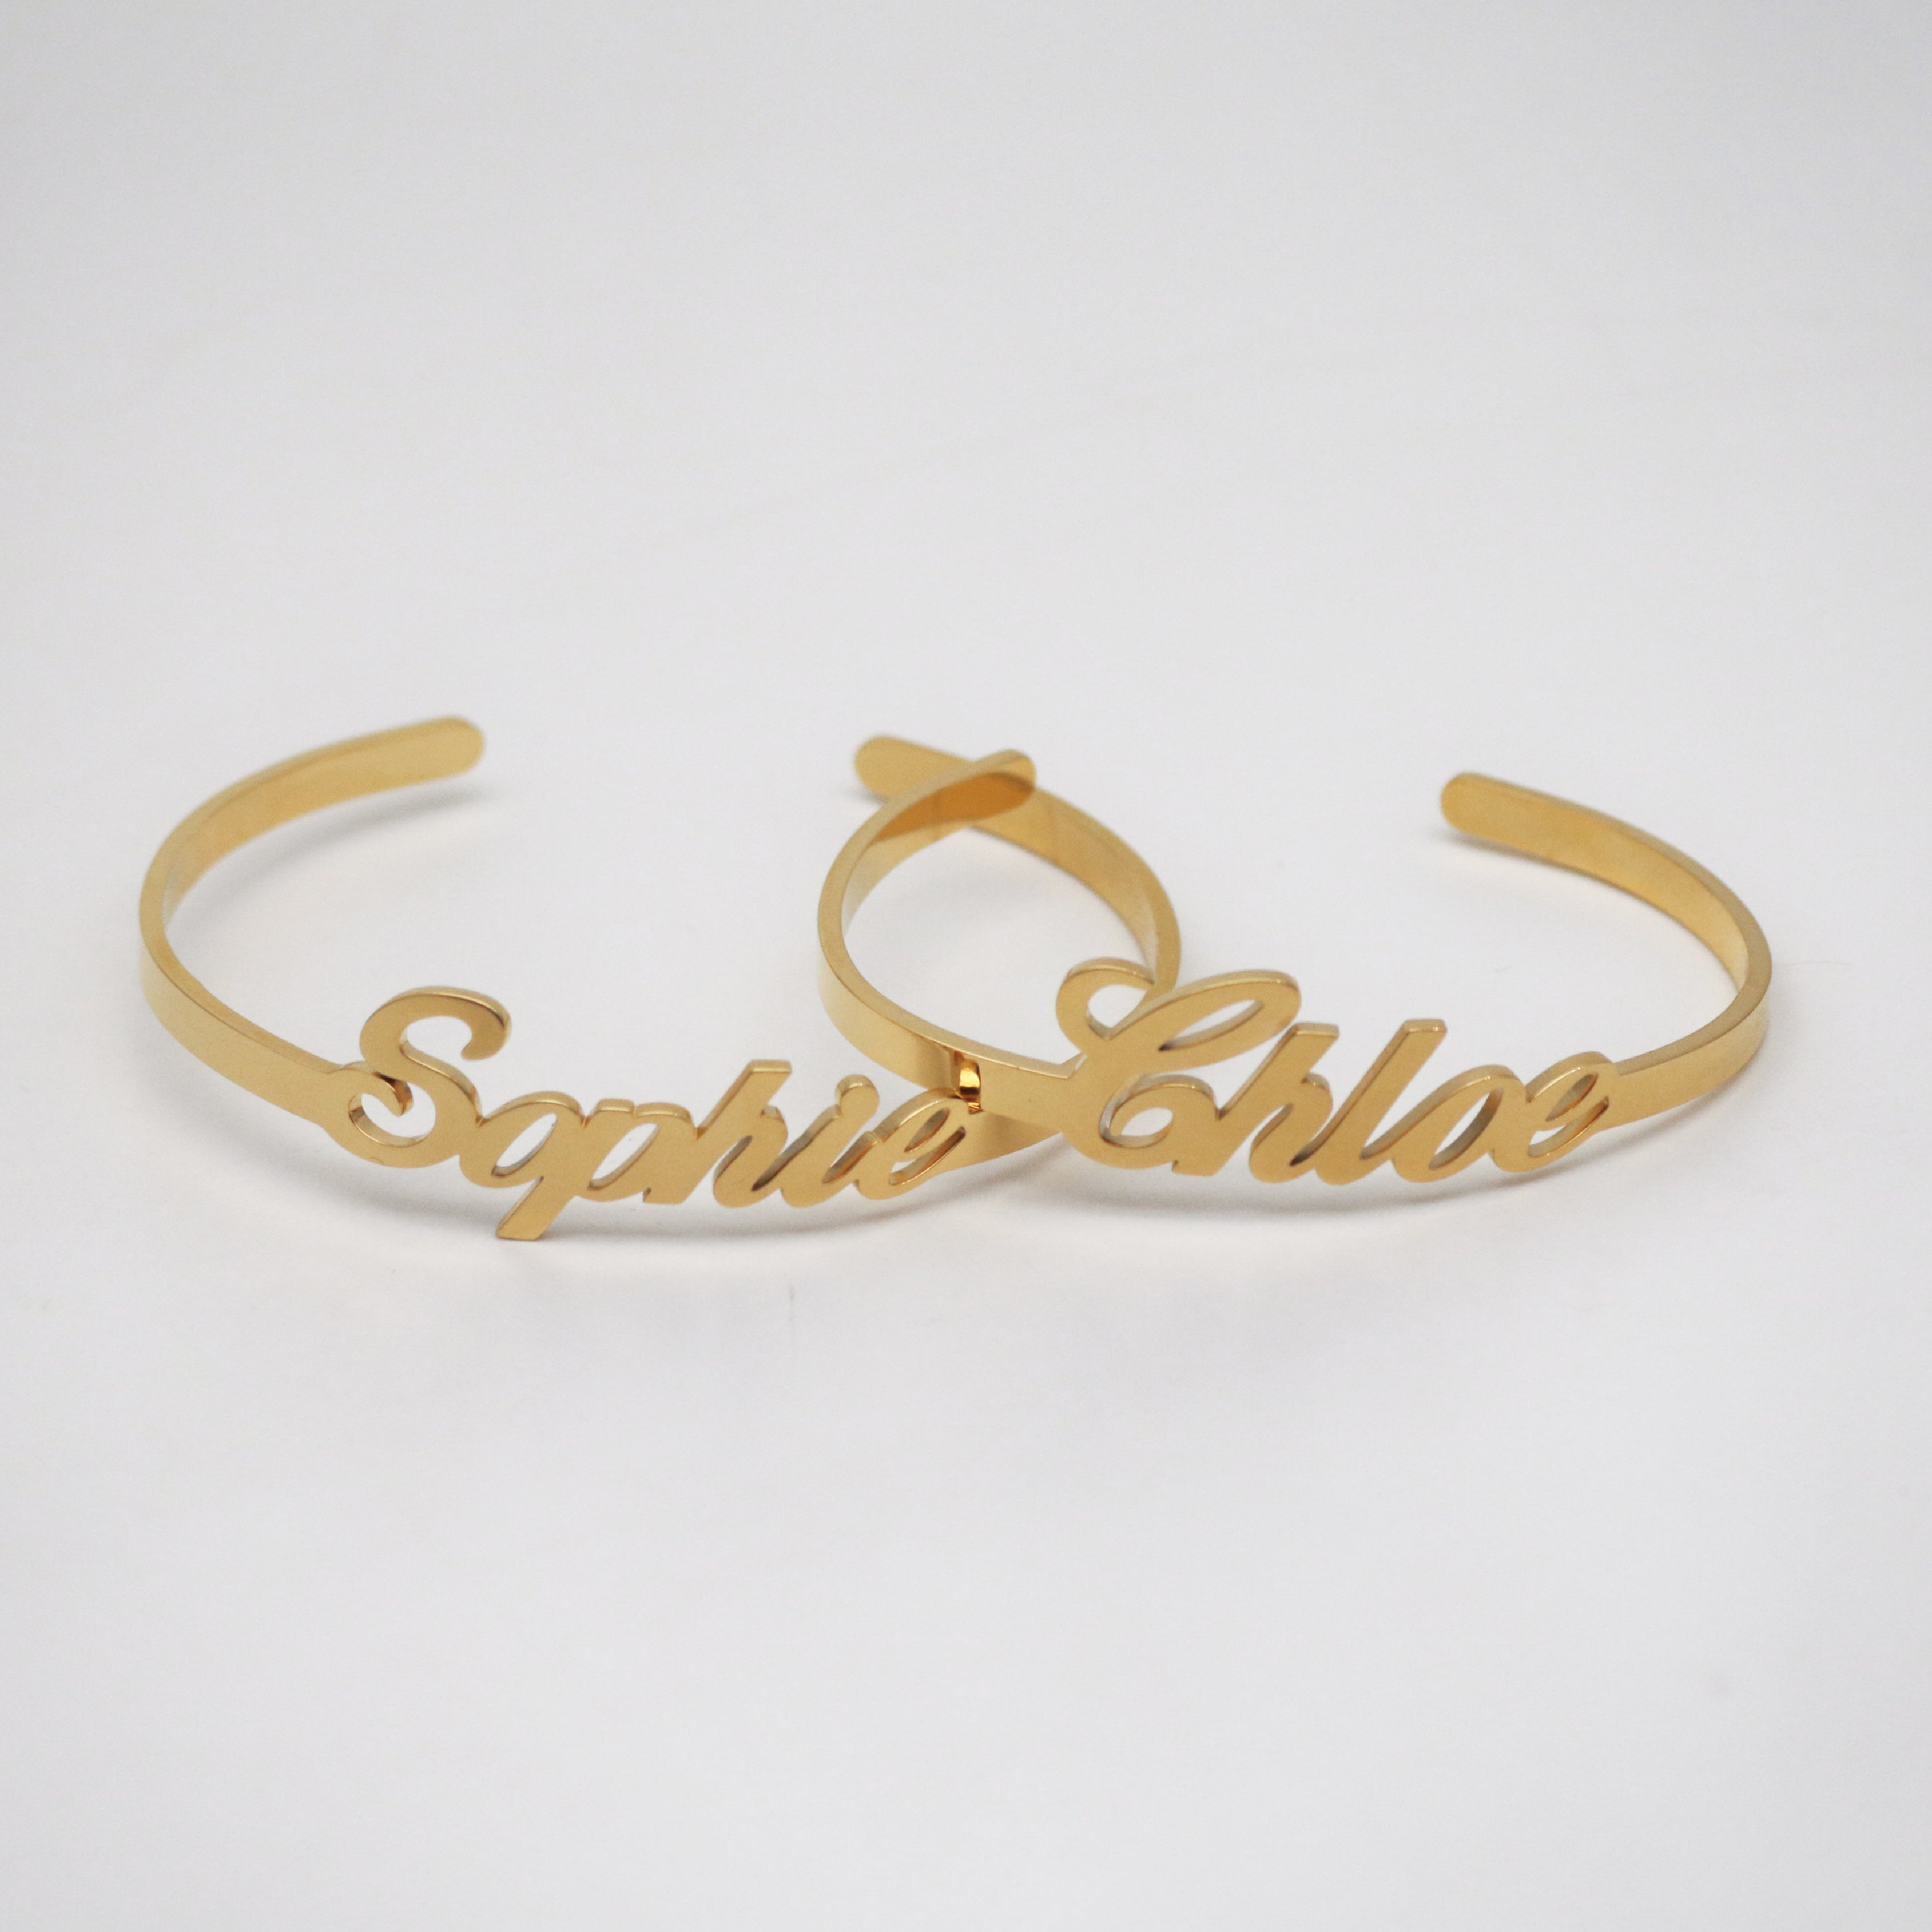 name cuff bracelet for baby